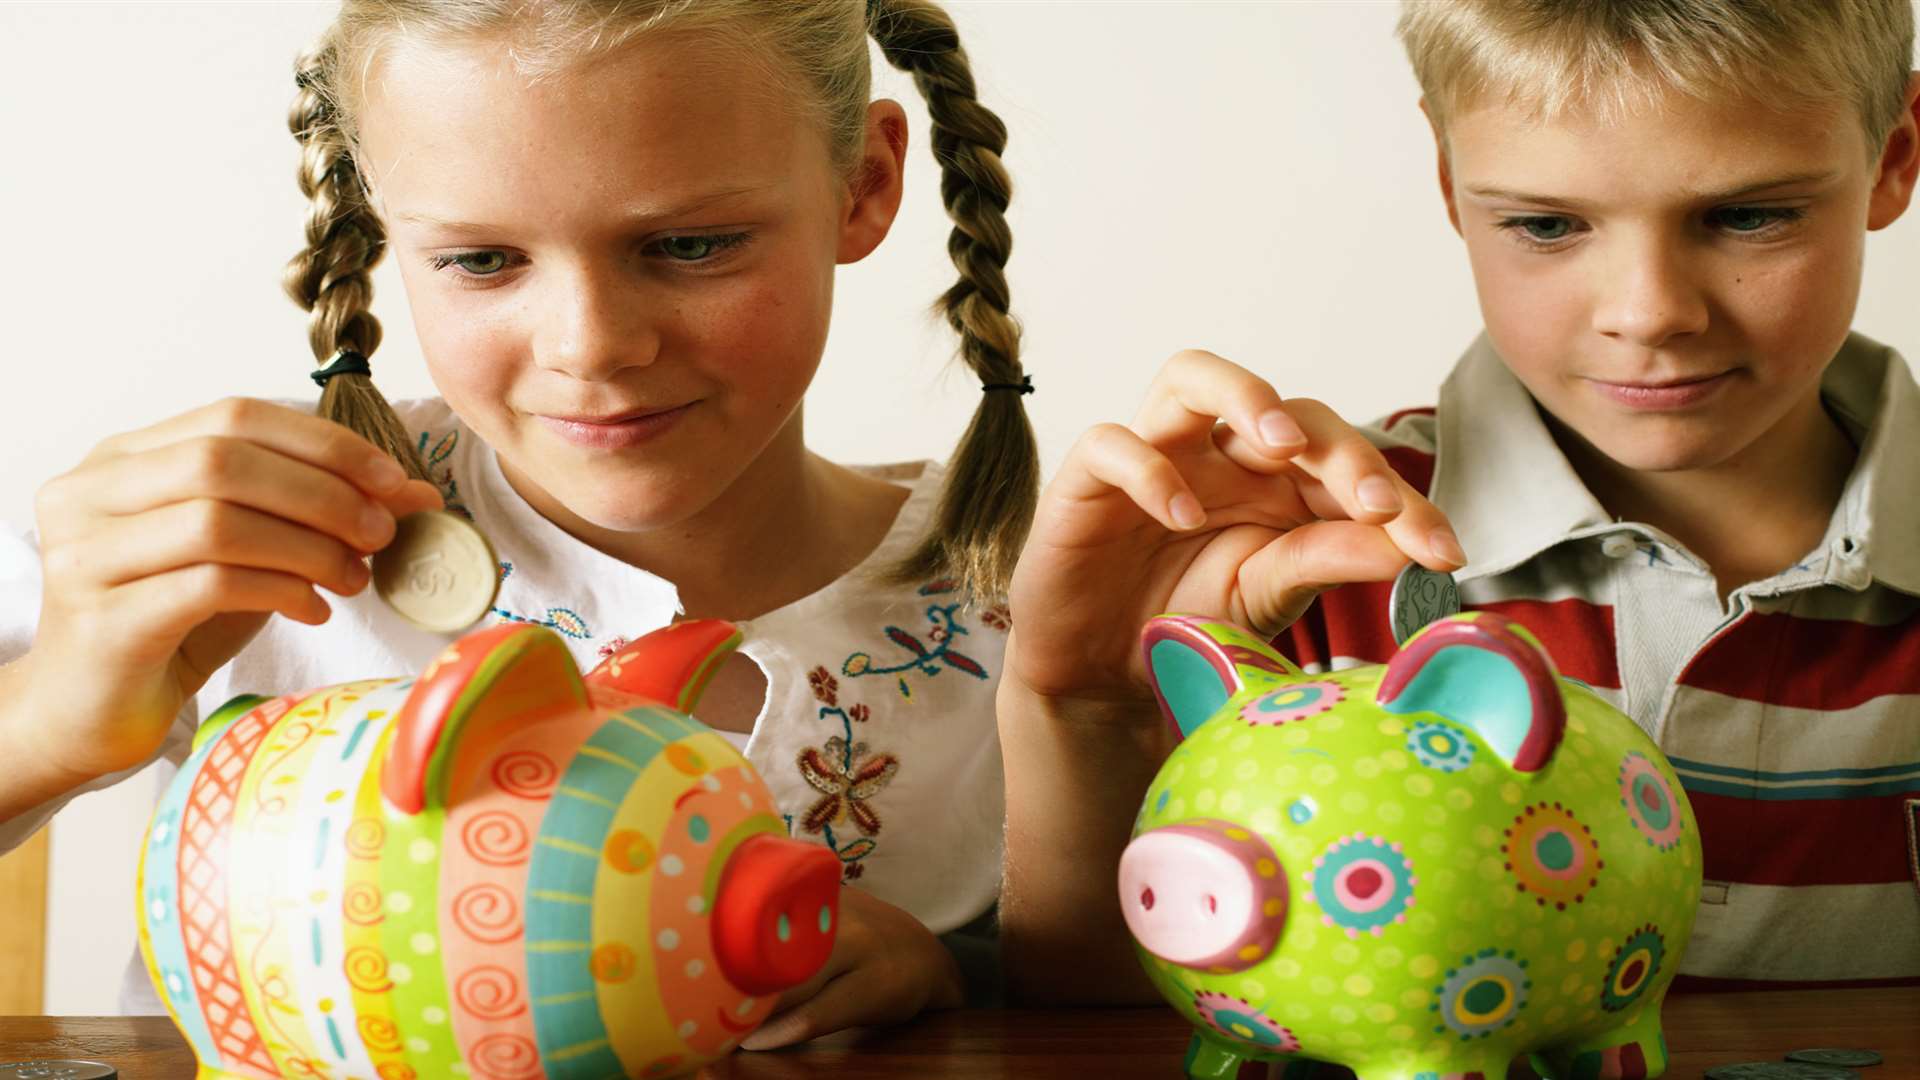 Children in the south east are paid an average of £7.24 in pocket money